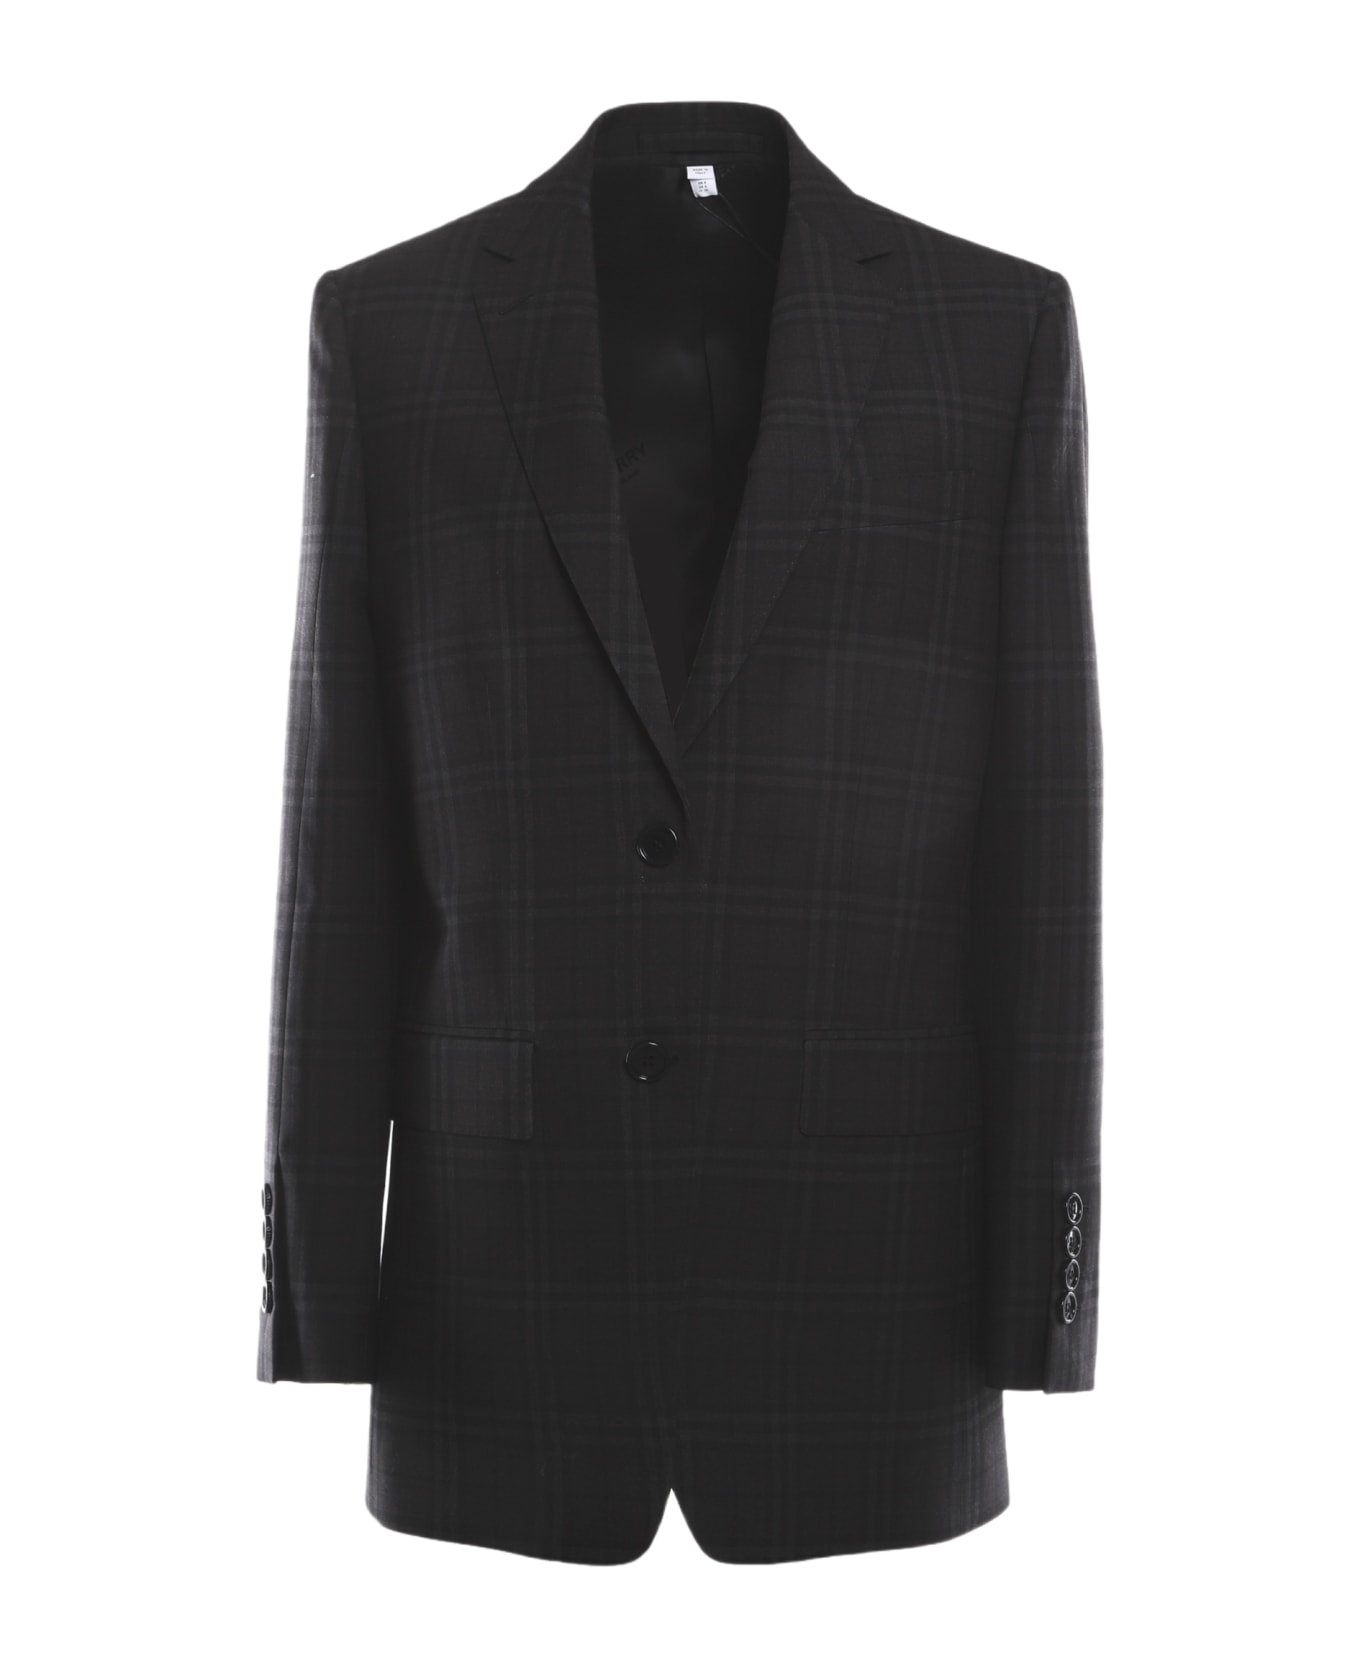 Burberry Wool Jacket With All-over Check Pattern - Dark charcoal